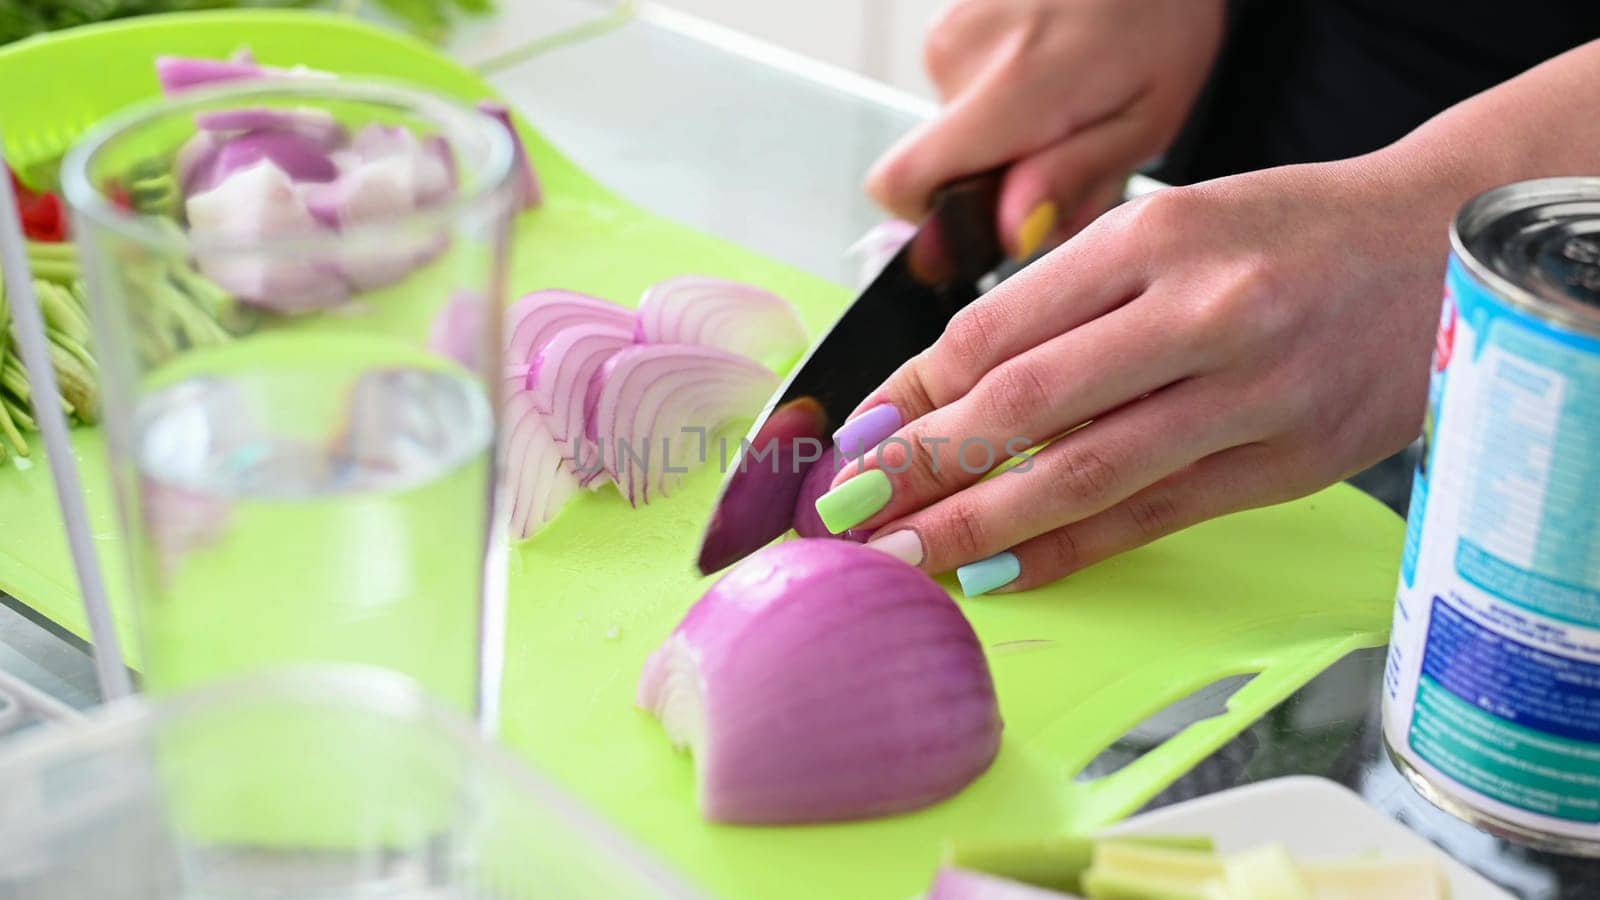 Chopping onion, close-up. Red onions close up. Female hands cut onions in the kitchen. The woman cuts onions on a yellow plastic board